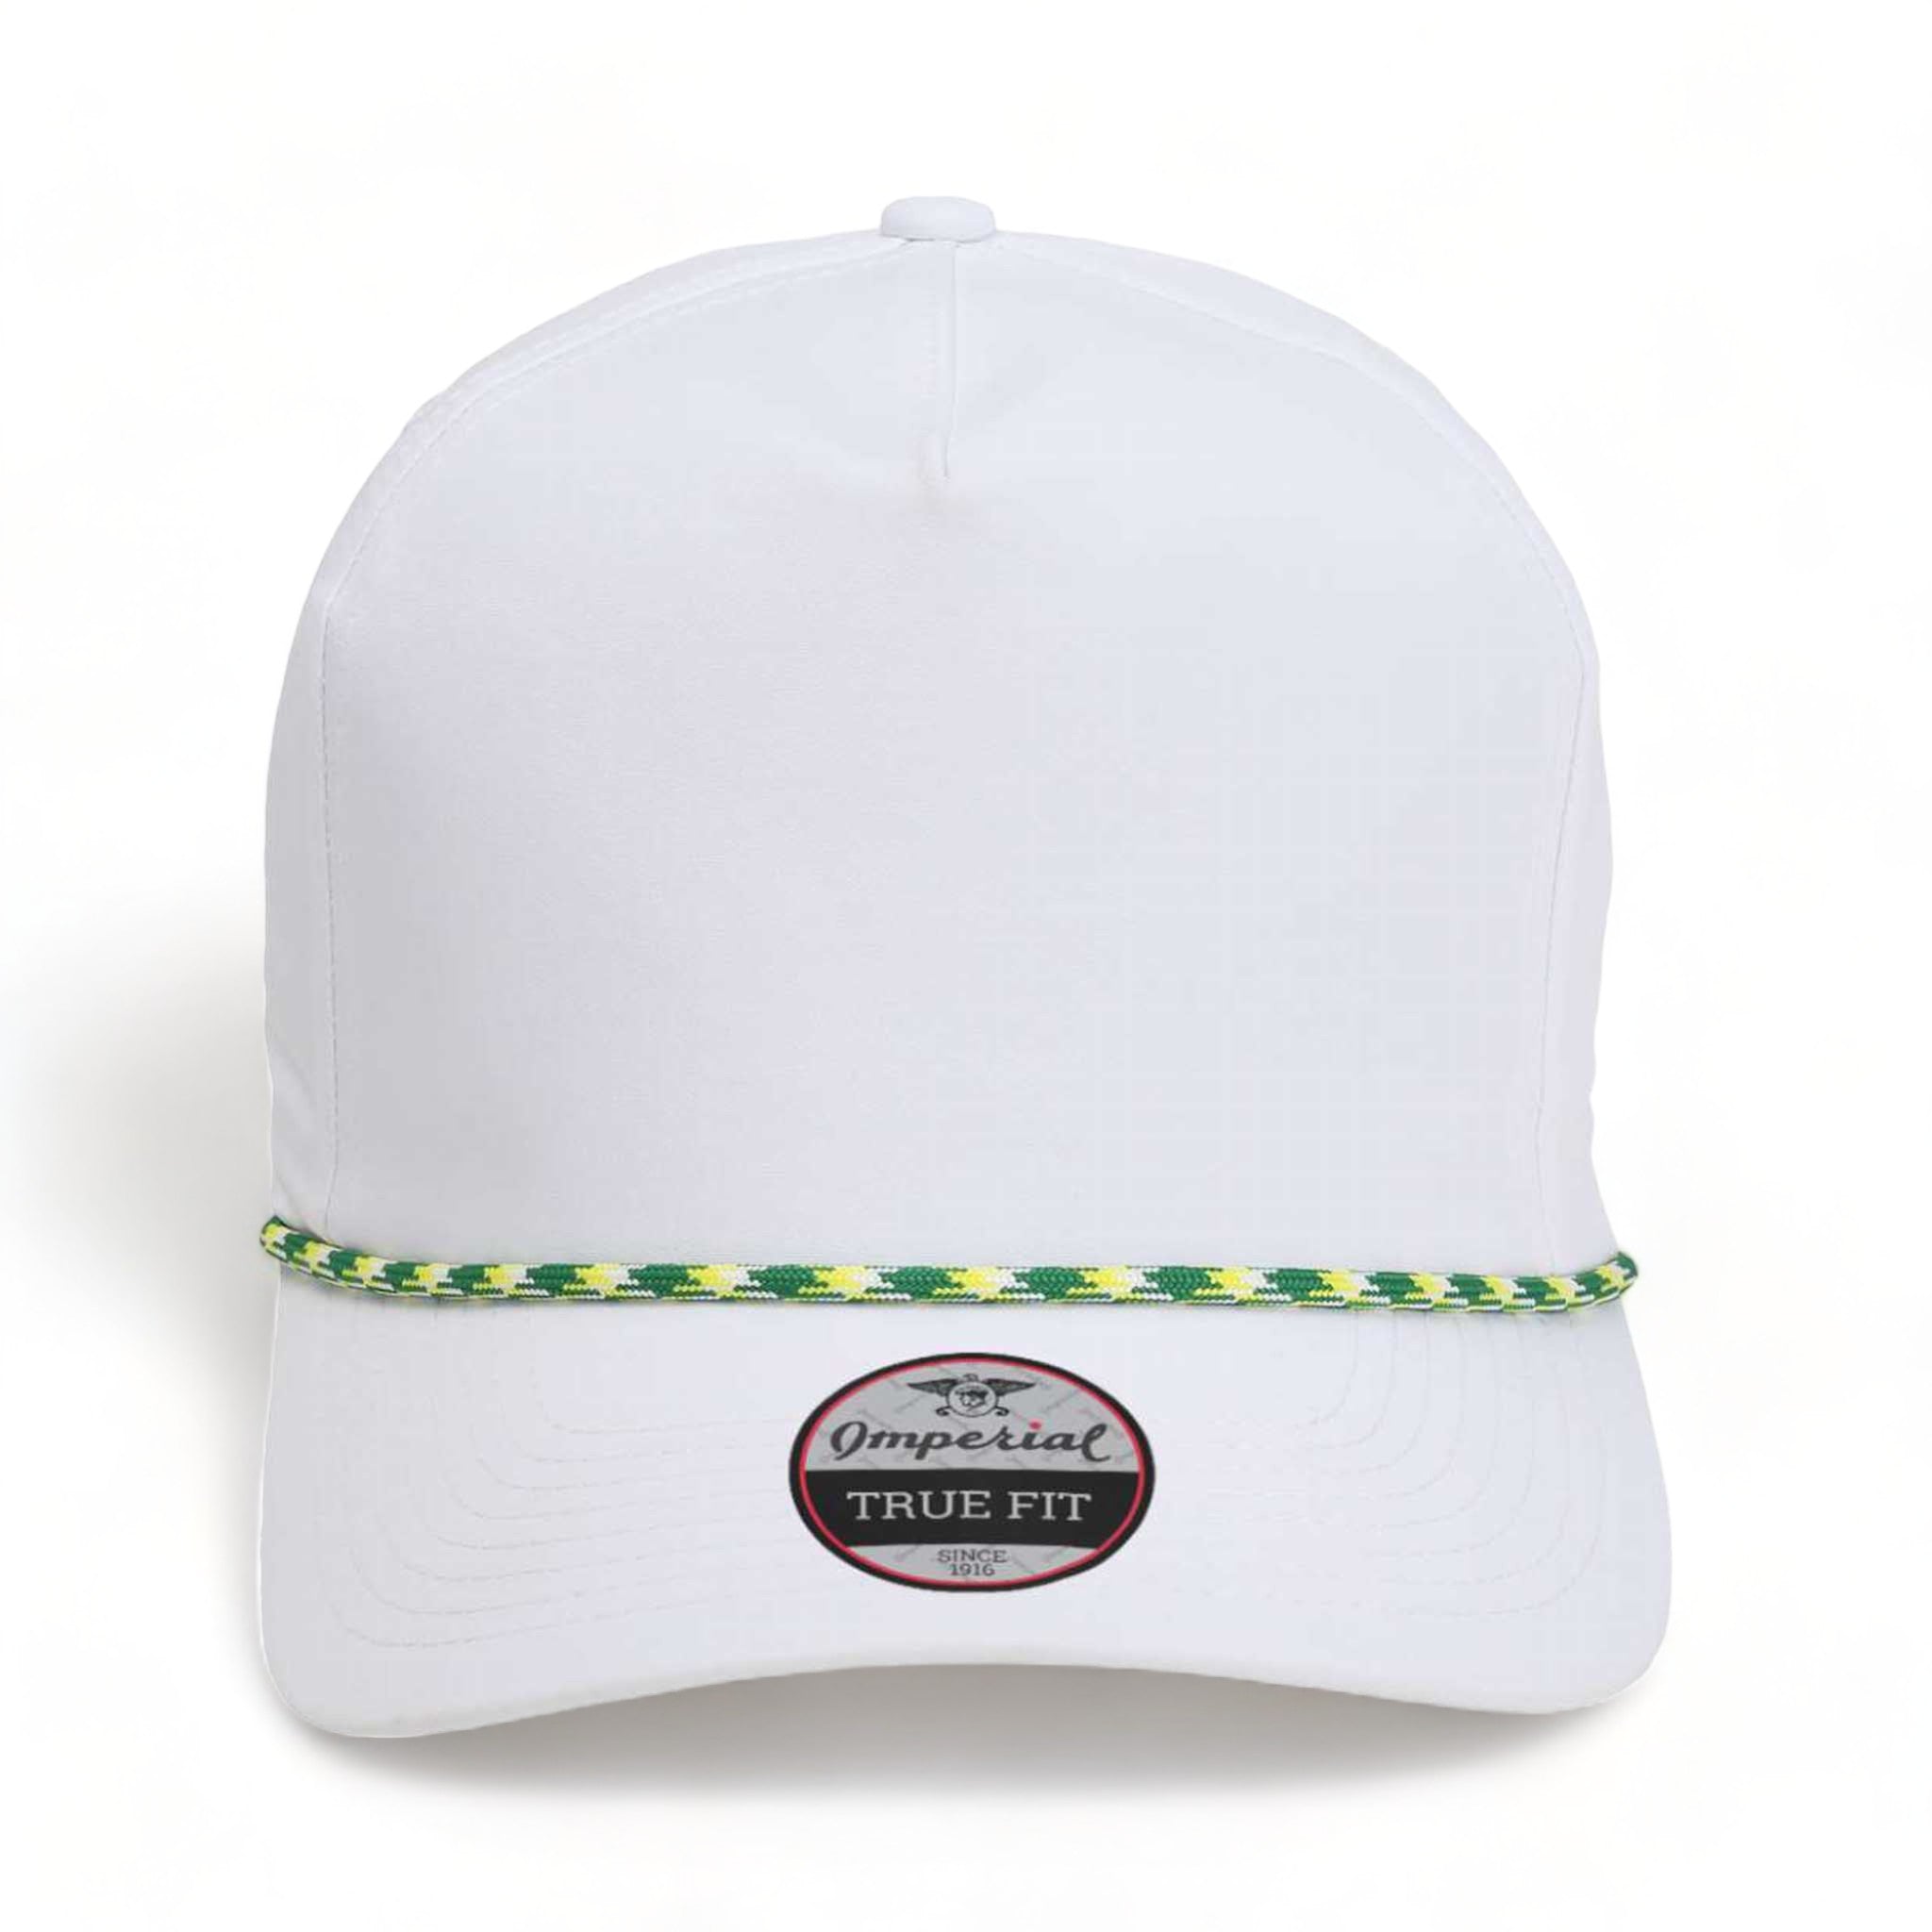 Front view of Imperial 5054 custom hat in white and green-yellow